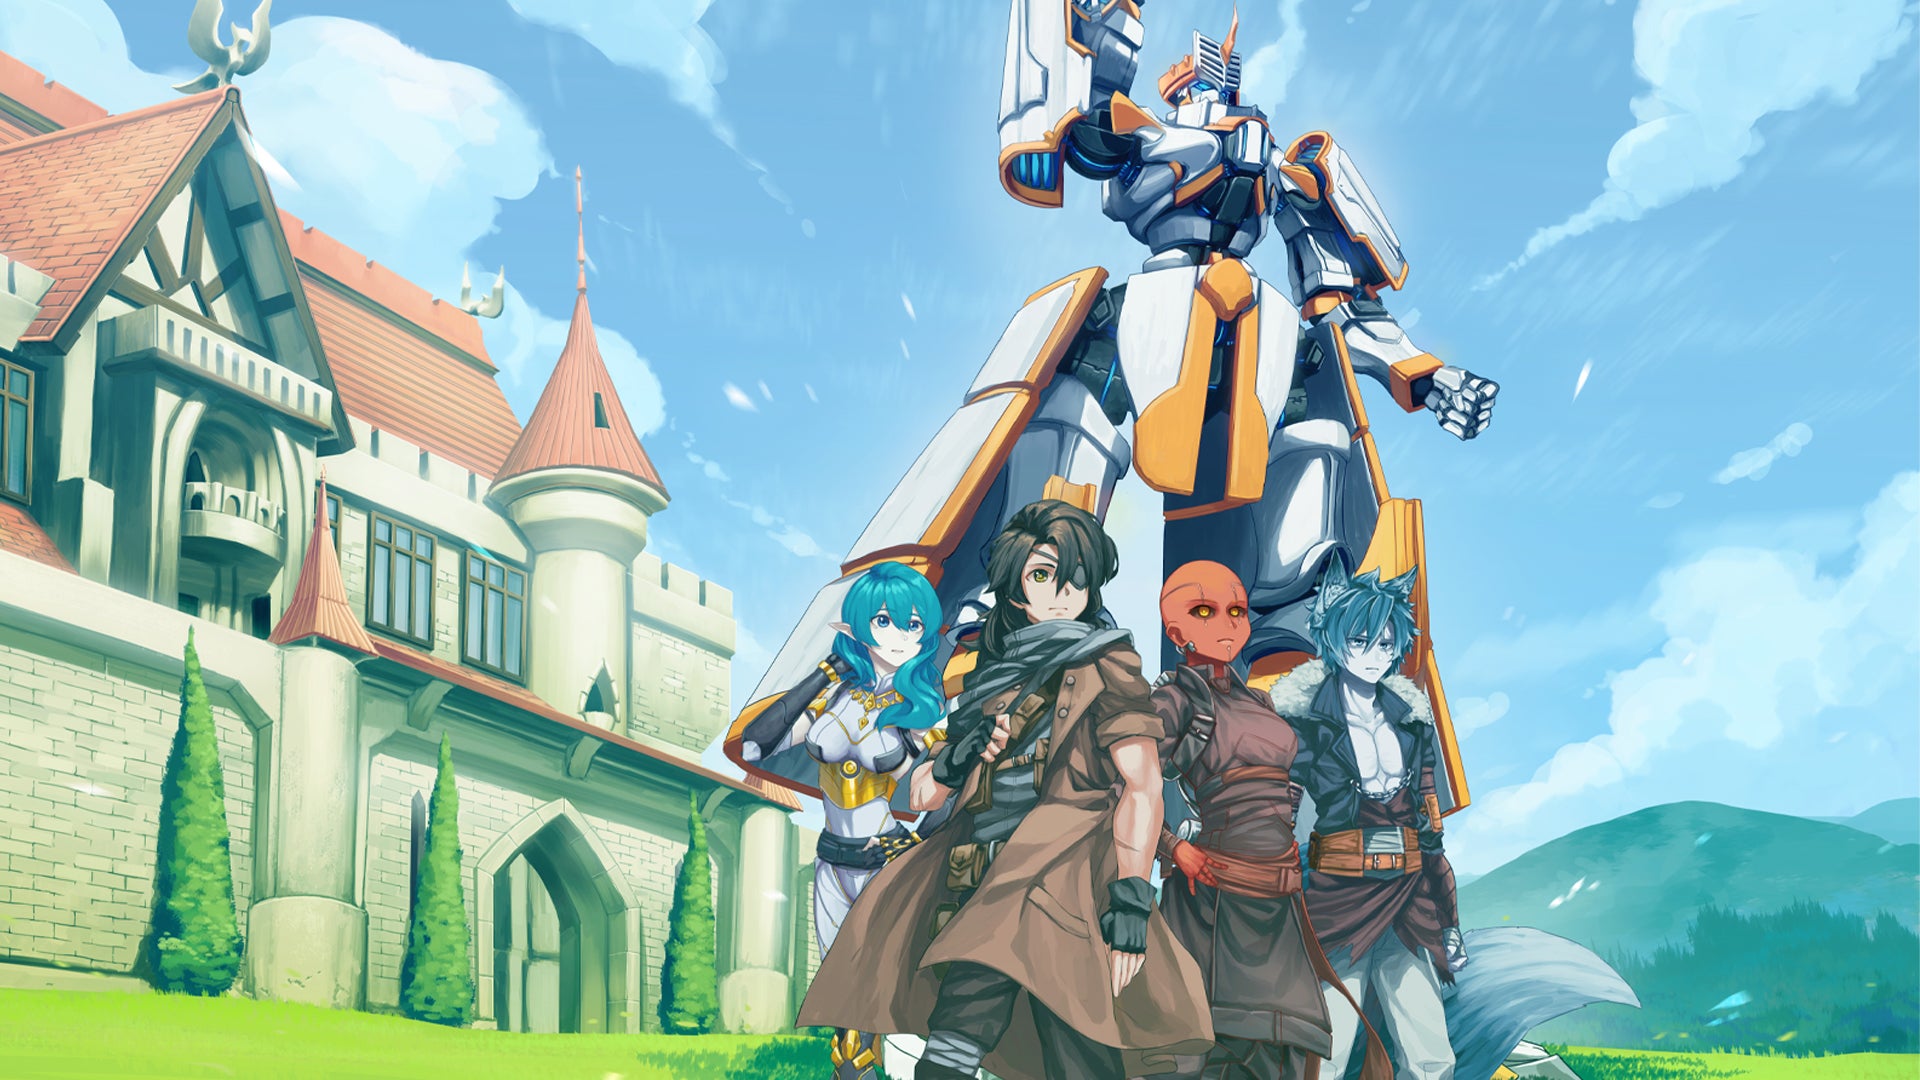 Image for Cowboy Bebop RPG studio’s Knights of the Round: Academy blends My Hero Academia, Gundam and King Arthur